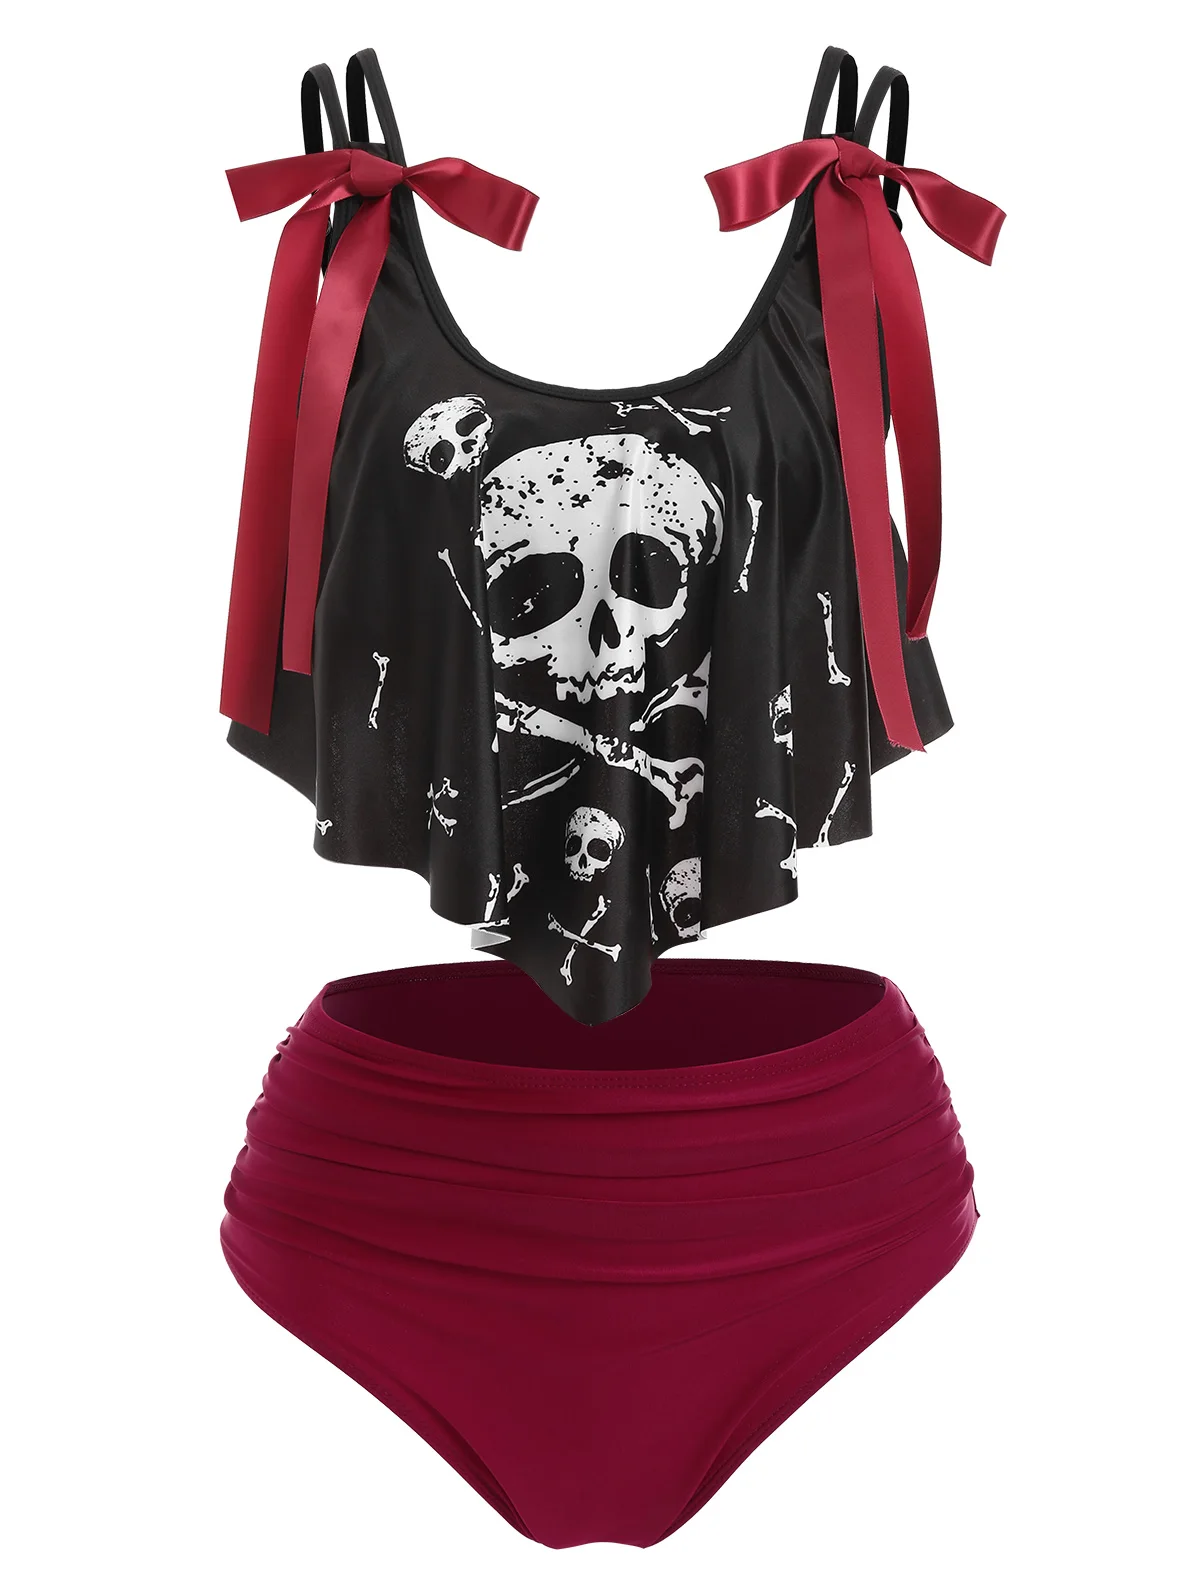 Skull Print Bowknot Detail Padded Tankini Set Gothic Casual Women Fashion Summer Sexy Two Piece Swimsuit Beach